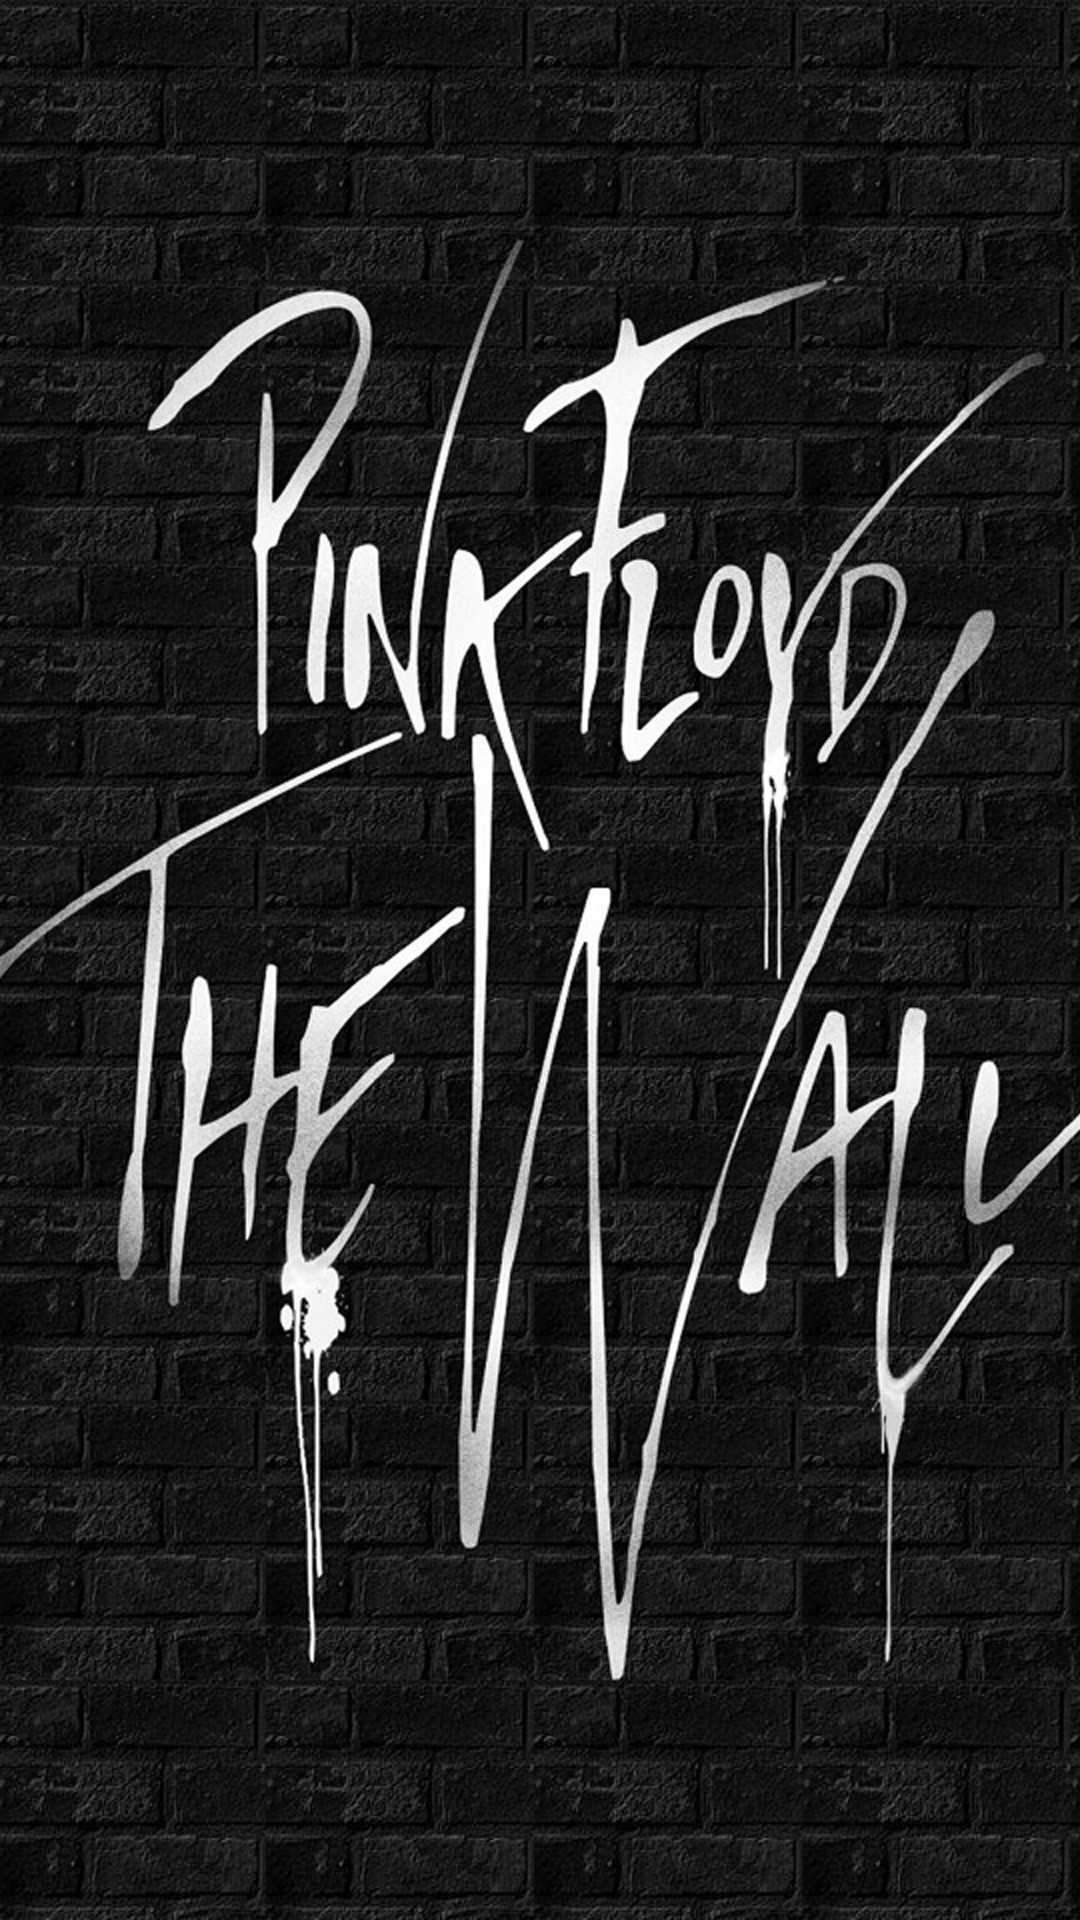 1080x1920 ... hd pink floyd wallpapers wallpaper wiki; iphone 6 plus archives page 74  of 108 wallpapers for iphone ...